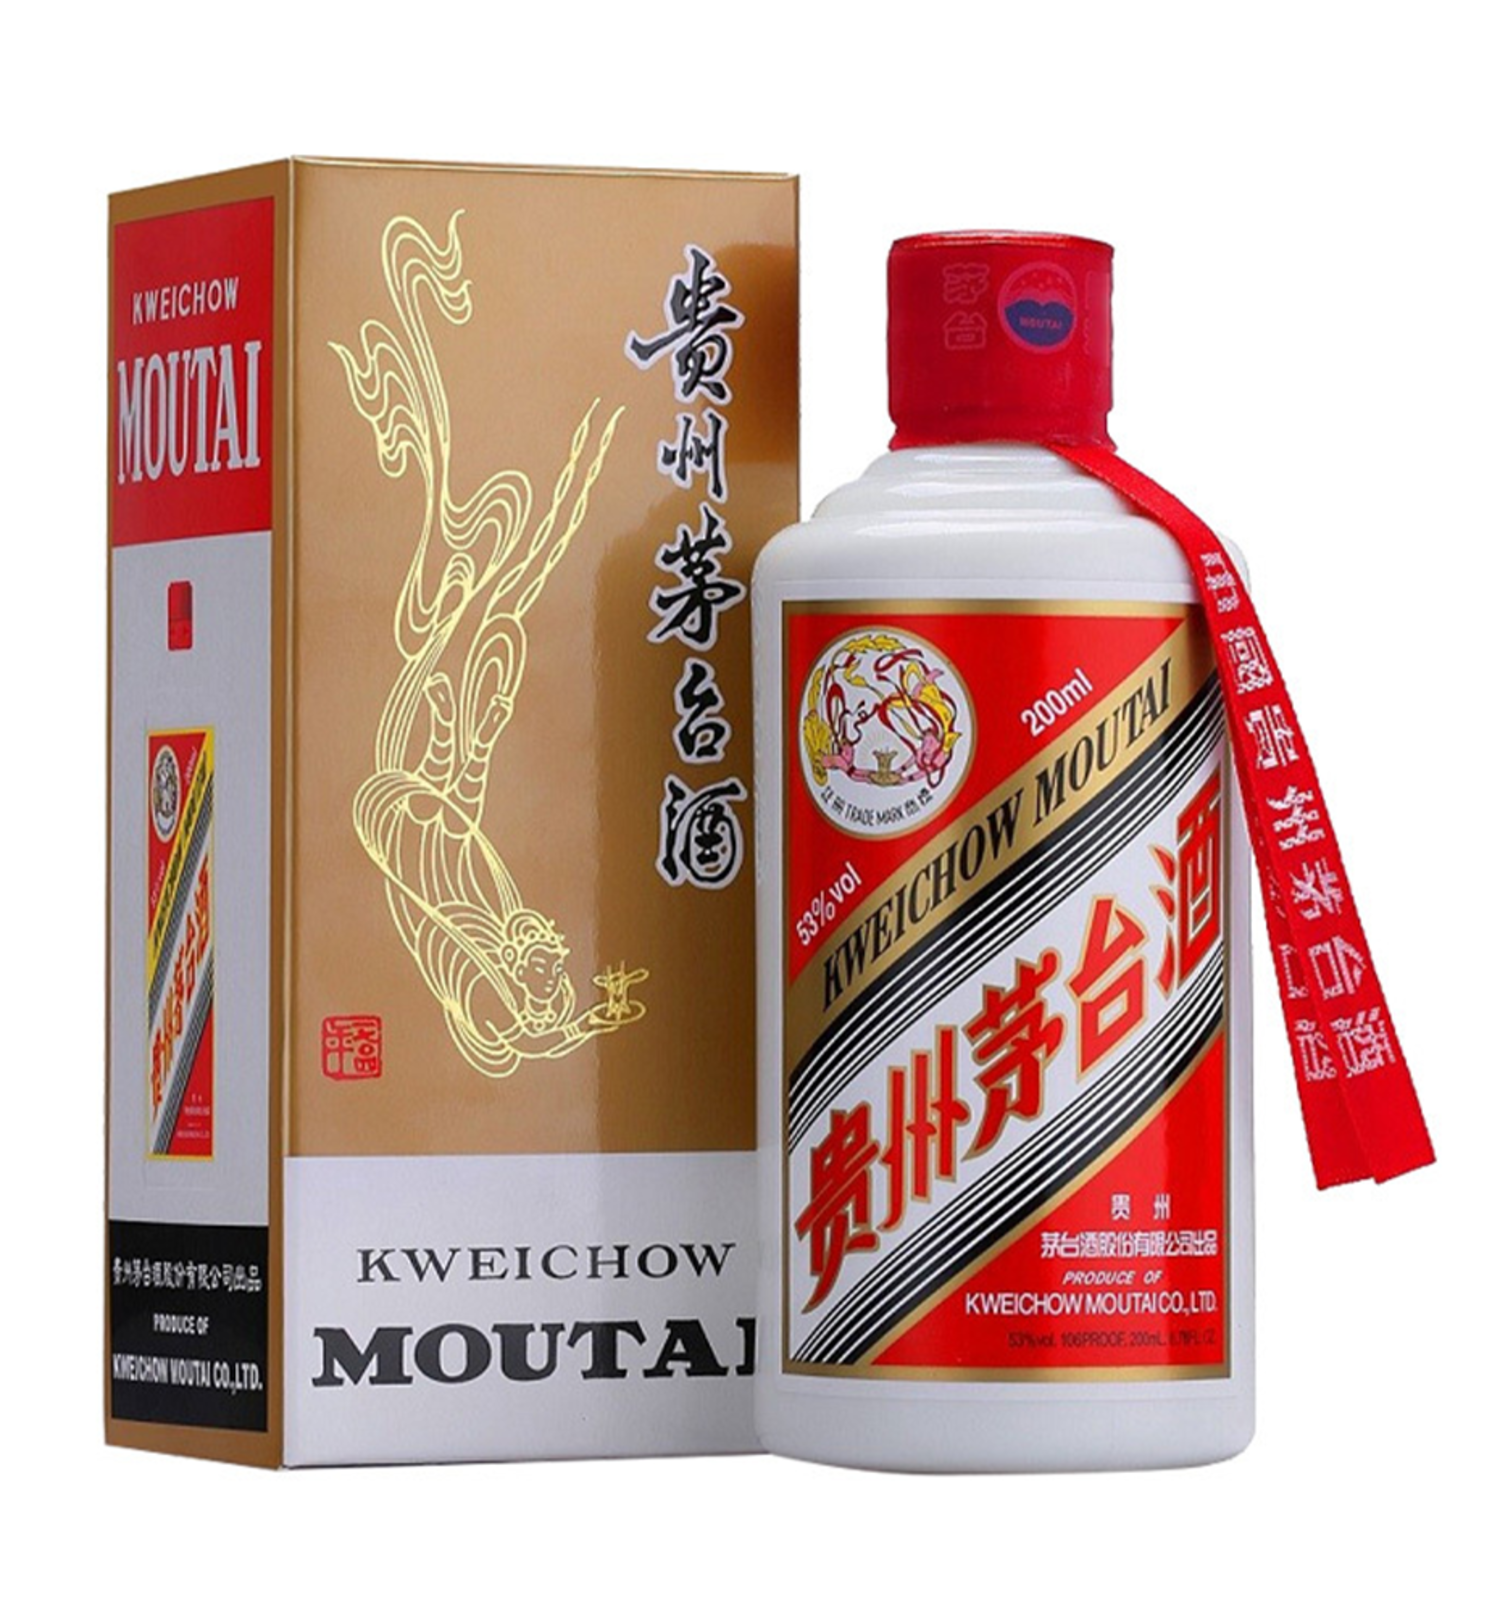 Moutai 贵州茅台200ml 2018 $503 FREE DELIVERY 茅台批发价包邮- Uncle 